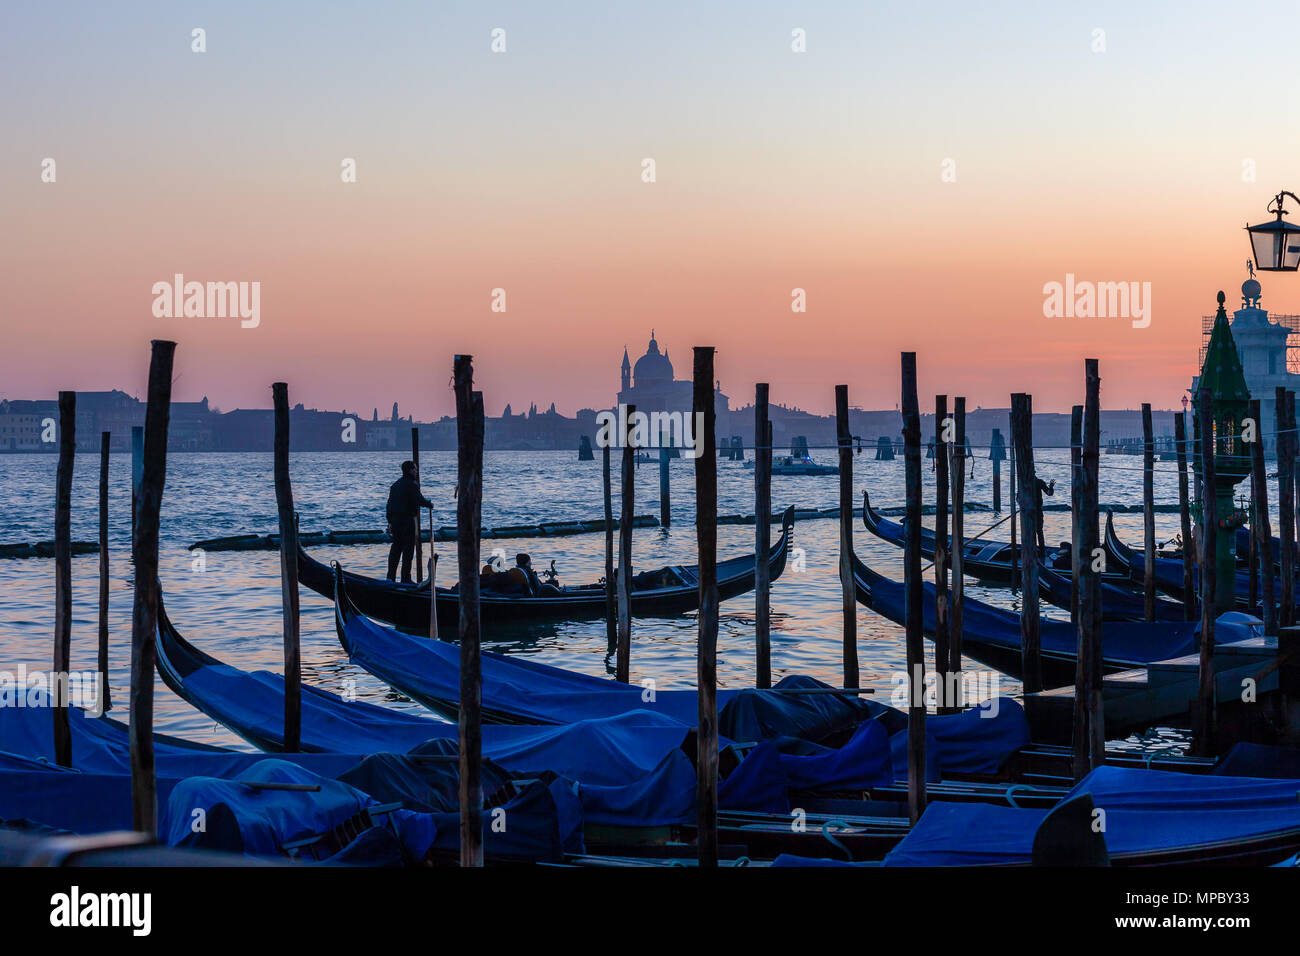 VENICE, ITALY - JANUARY 02 2018: Gondoloas  in the San Marco basin with Santissimo Redentore church and Giudecca island silhouette at sunset Stock Photo